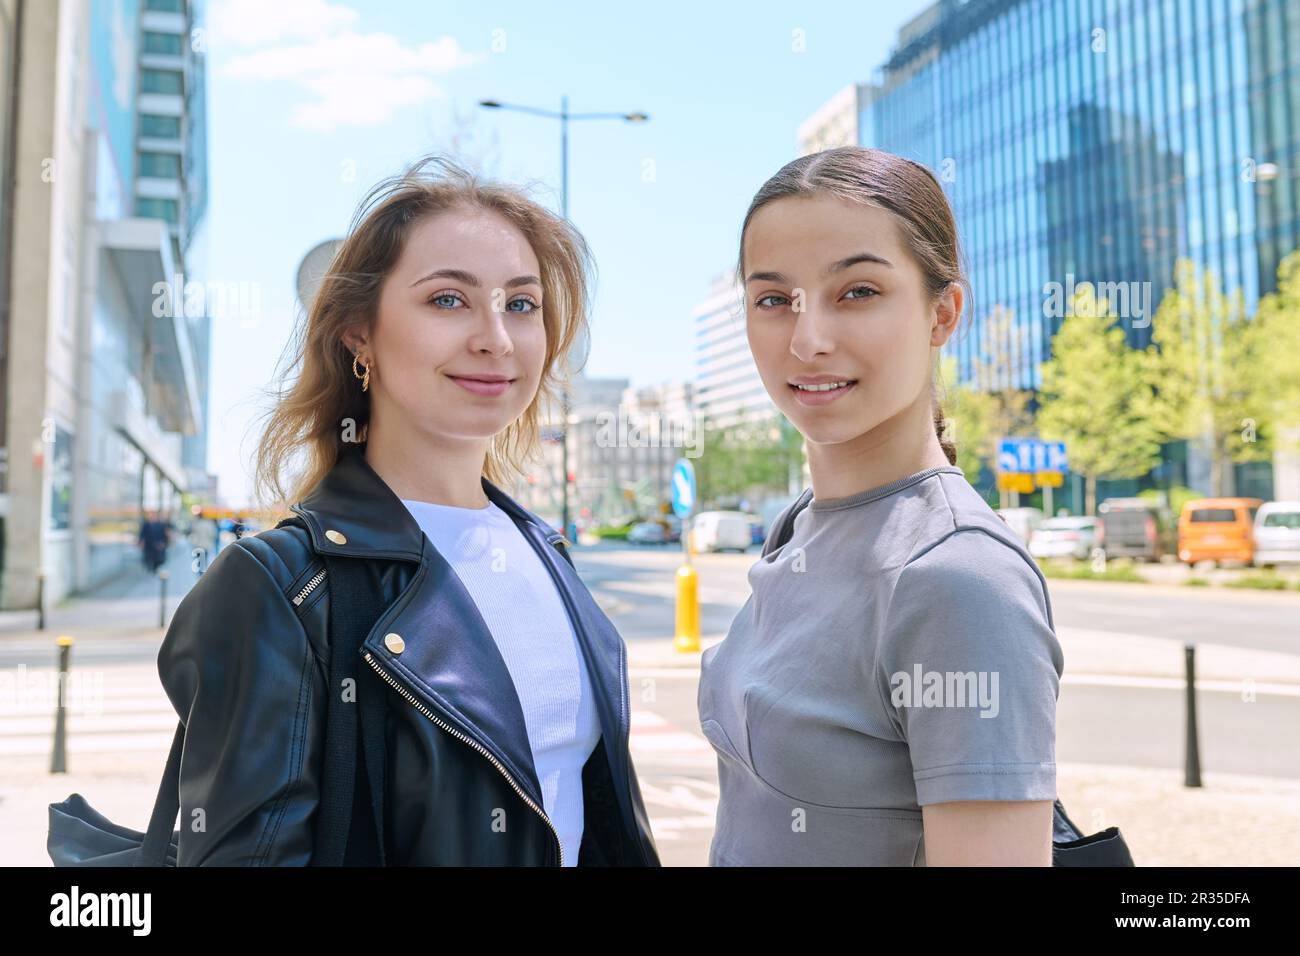 Two smiling female students looking at camera, urban modern background Stock Photo